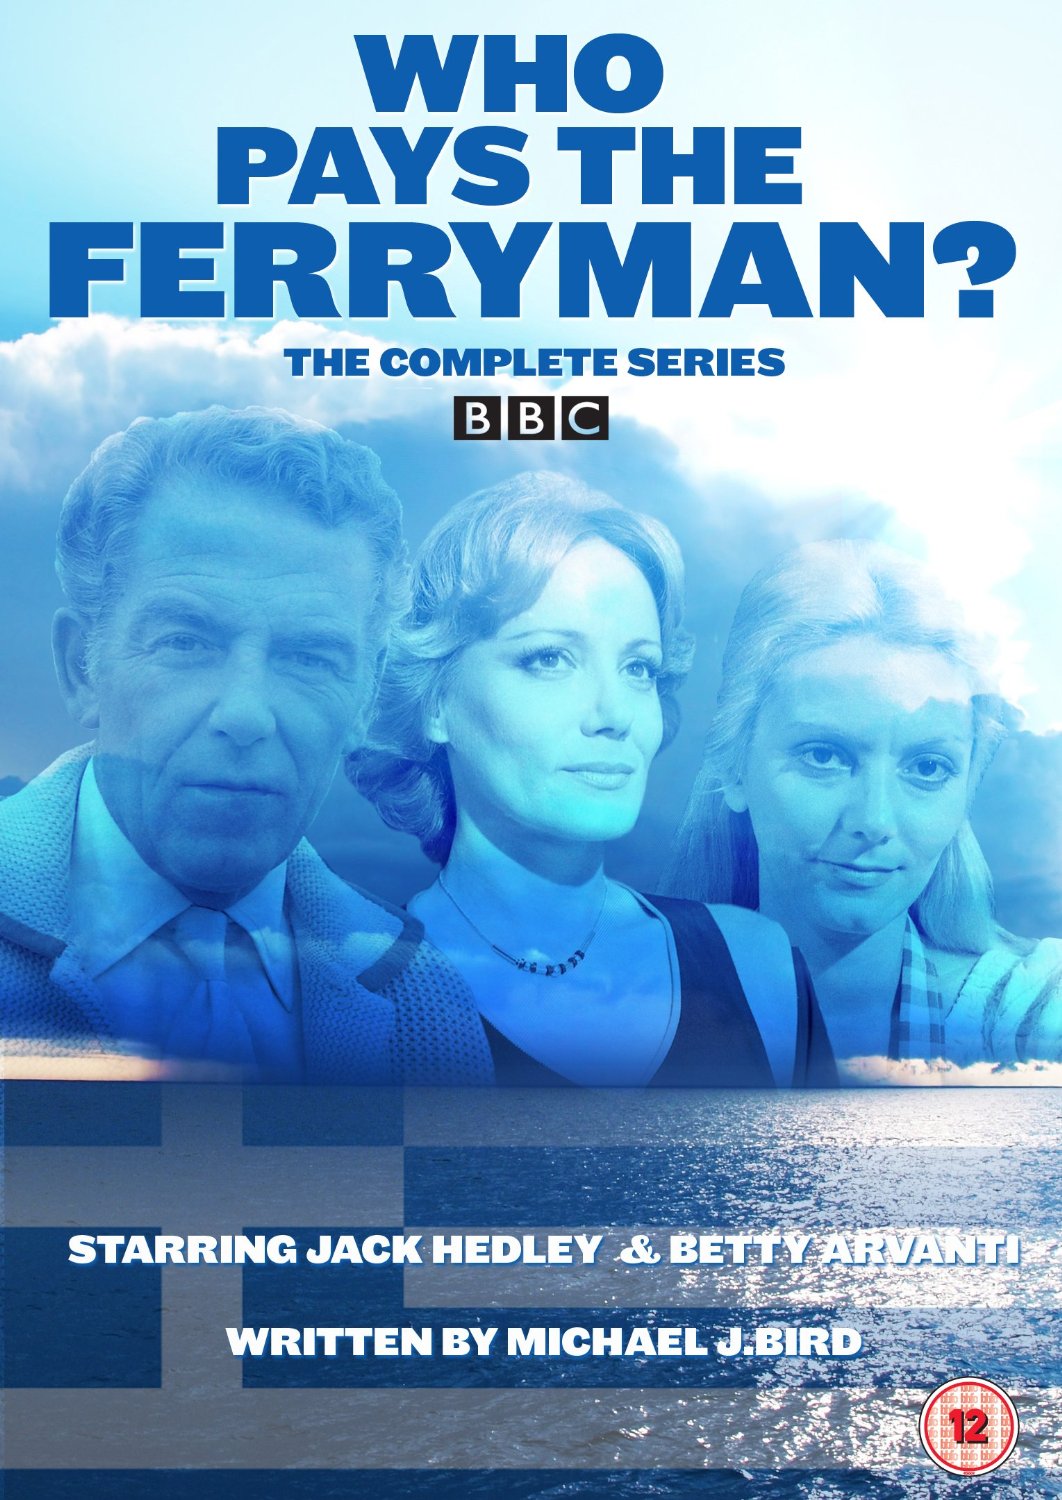 Who Pays the Ferryman TV Mini Series by BBC